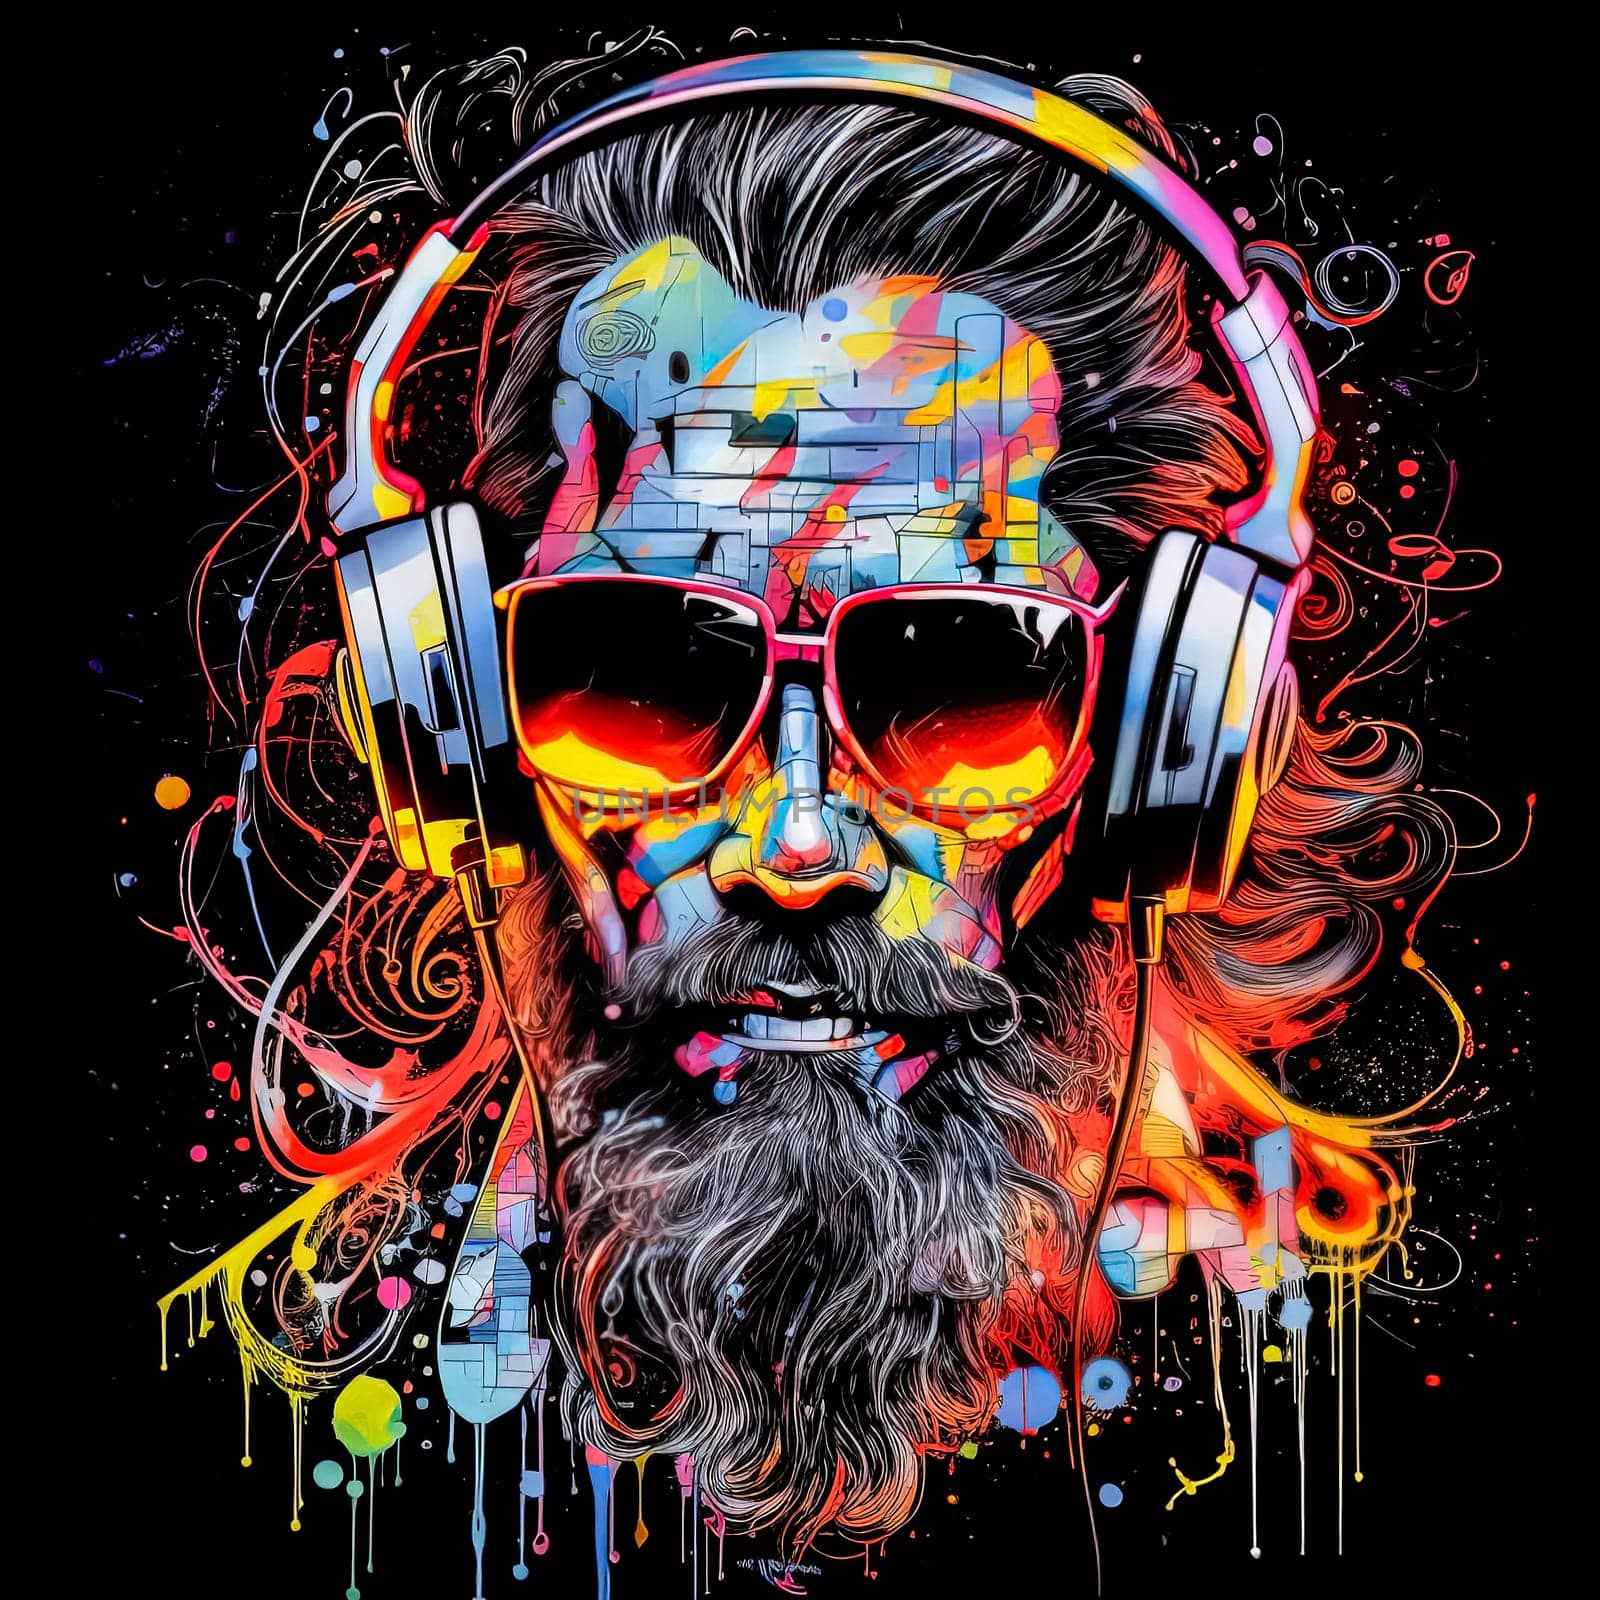 A man with a beard and sunglasses is wearing headphones. by Alla_Morozova93